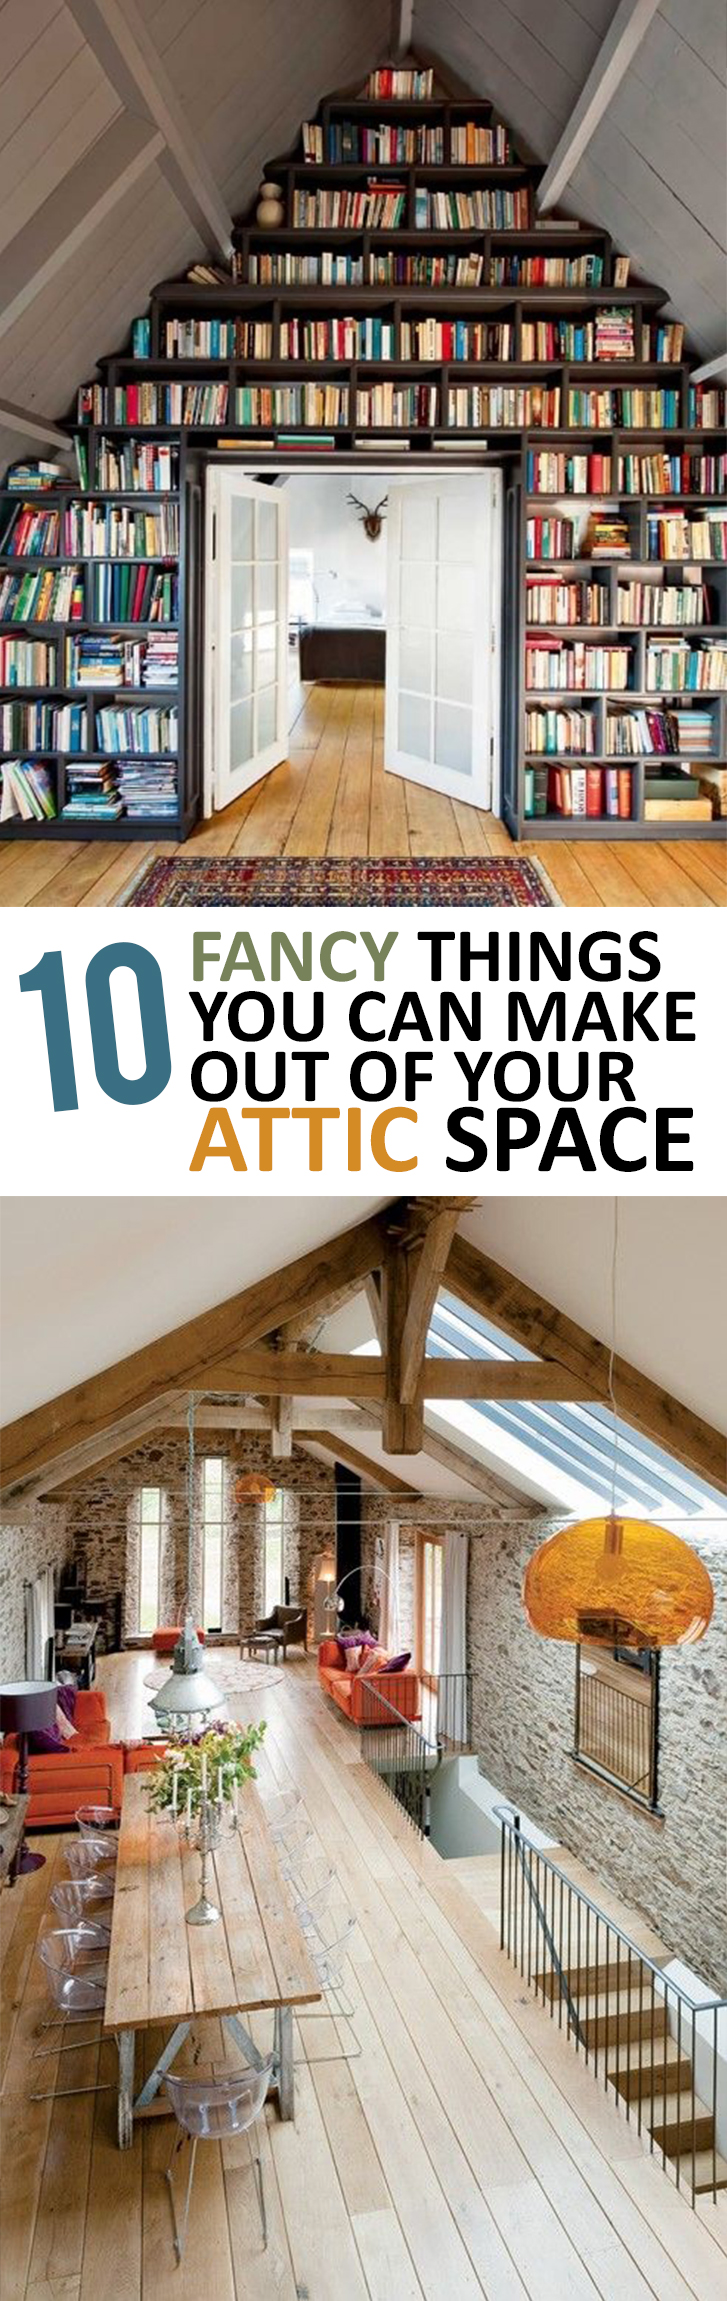 10 Fancy Things You Can Make out of Your Attic Space